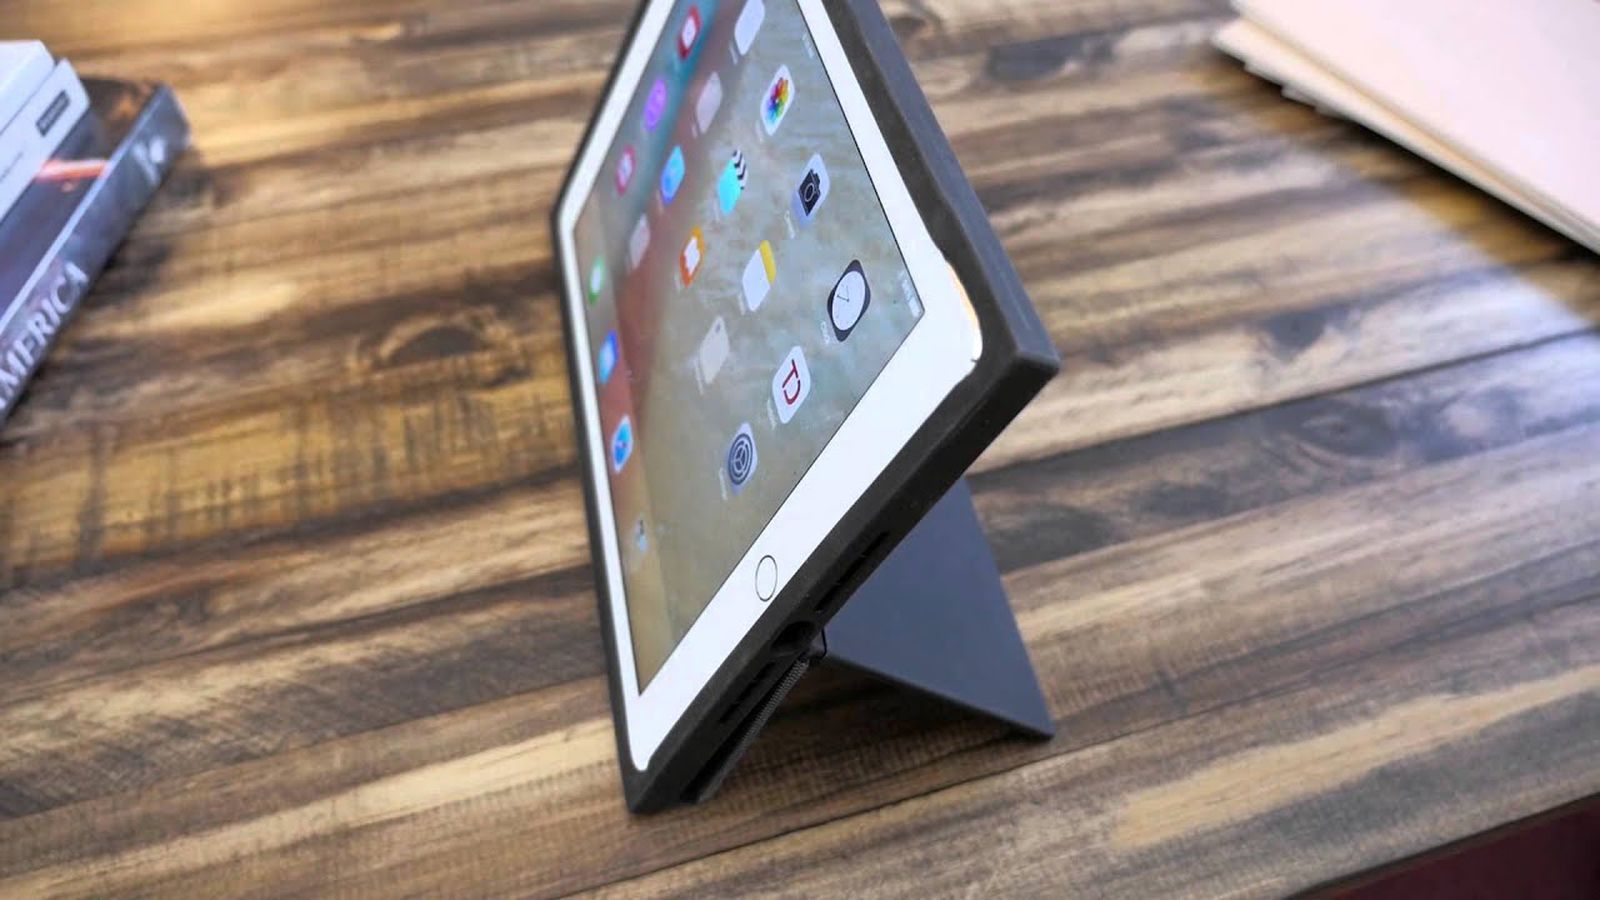 Video Review: Logitech’s ‘Blok’ Case Lineup for the iPad Air 2